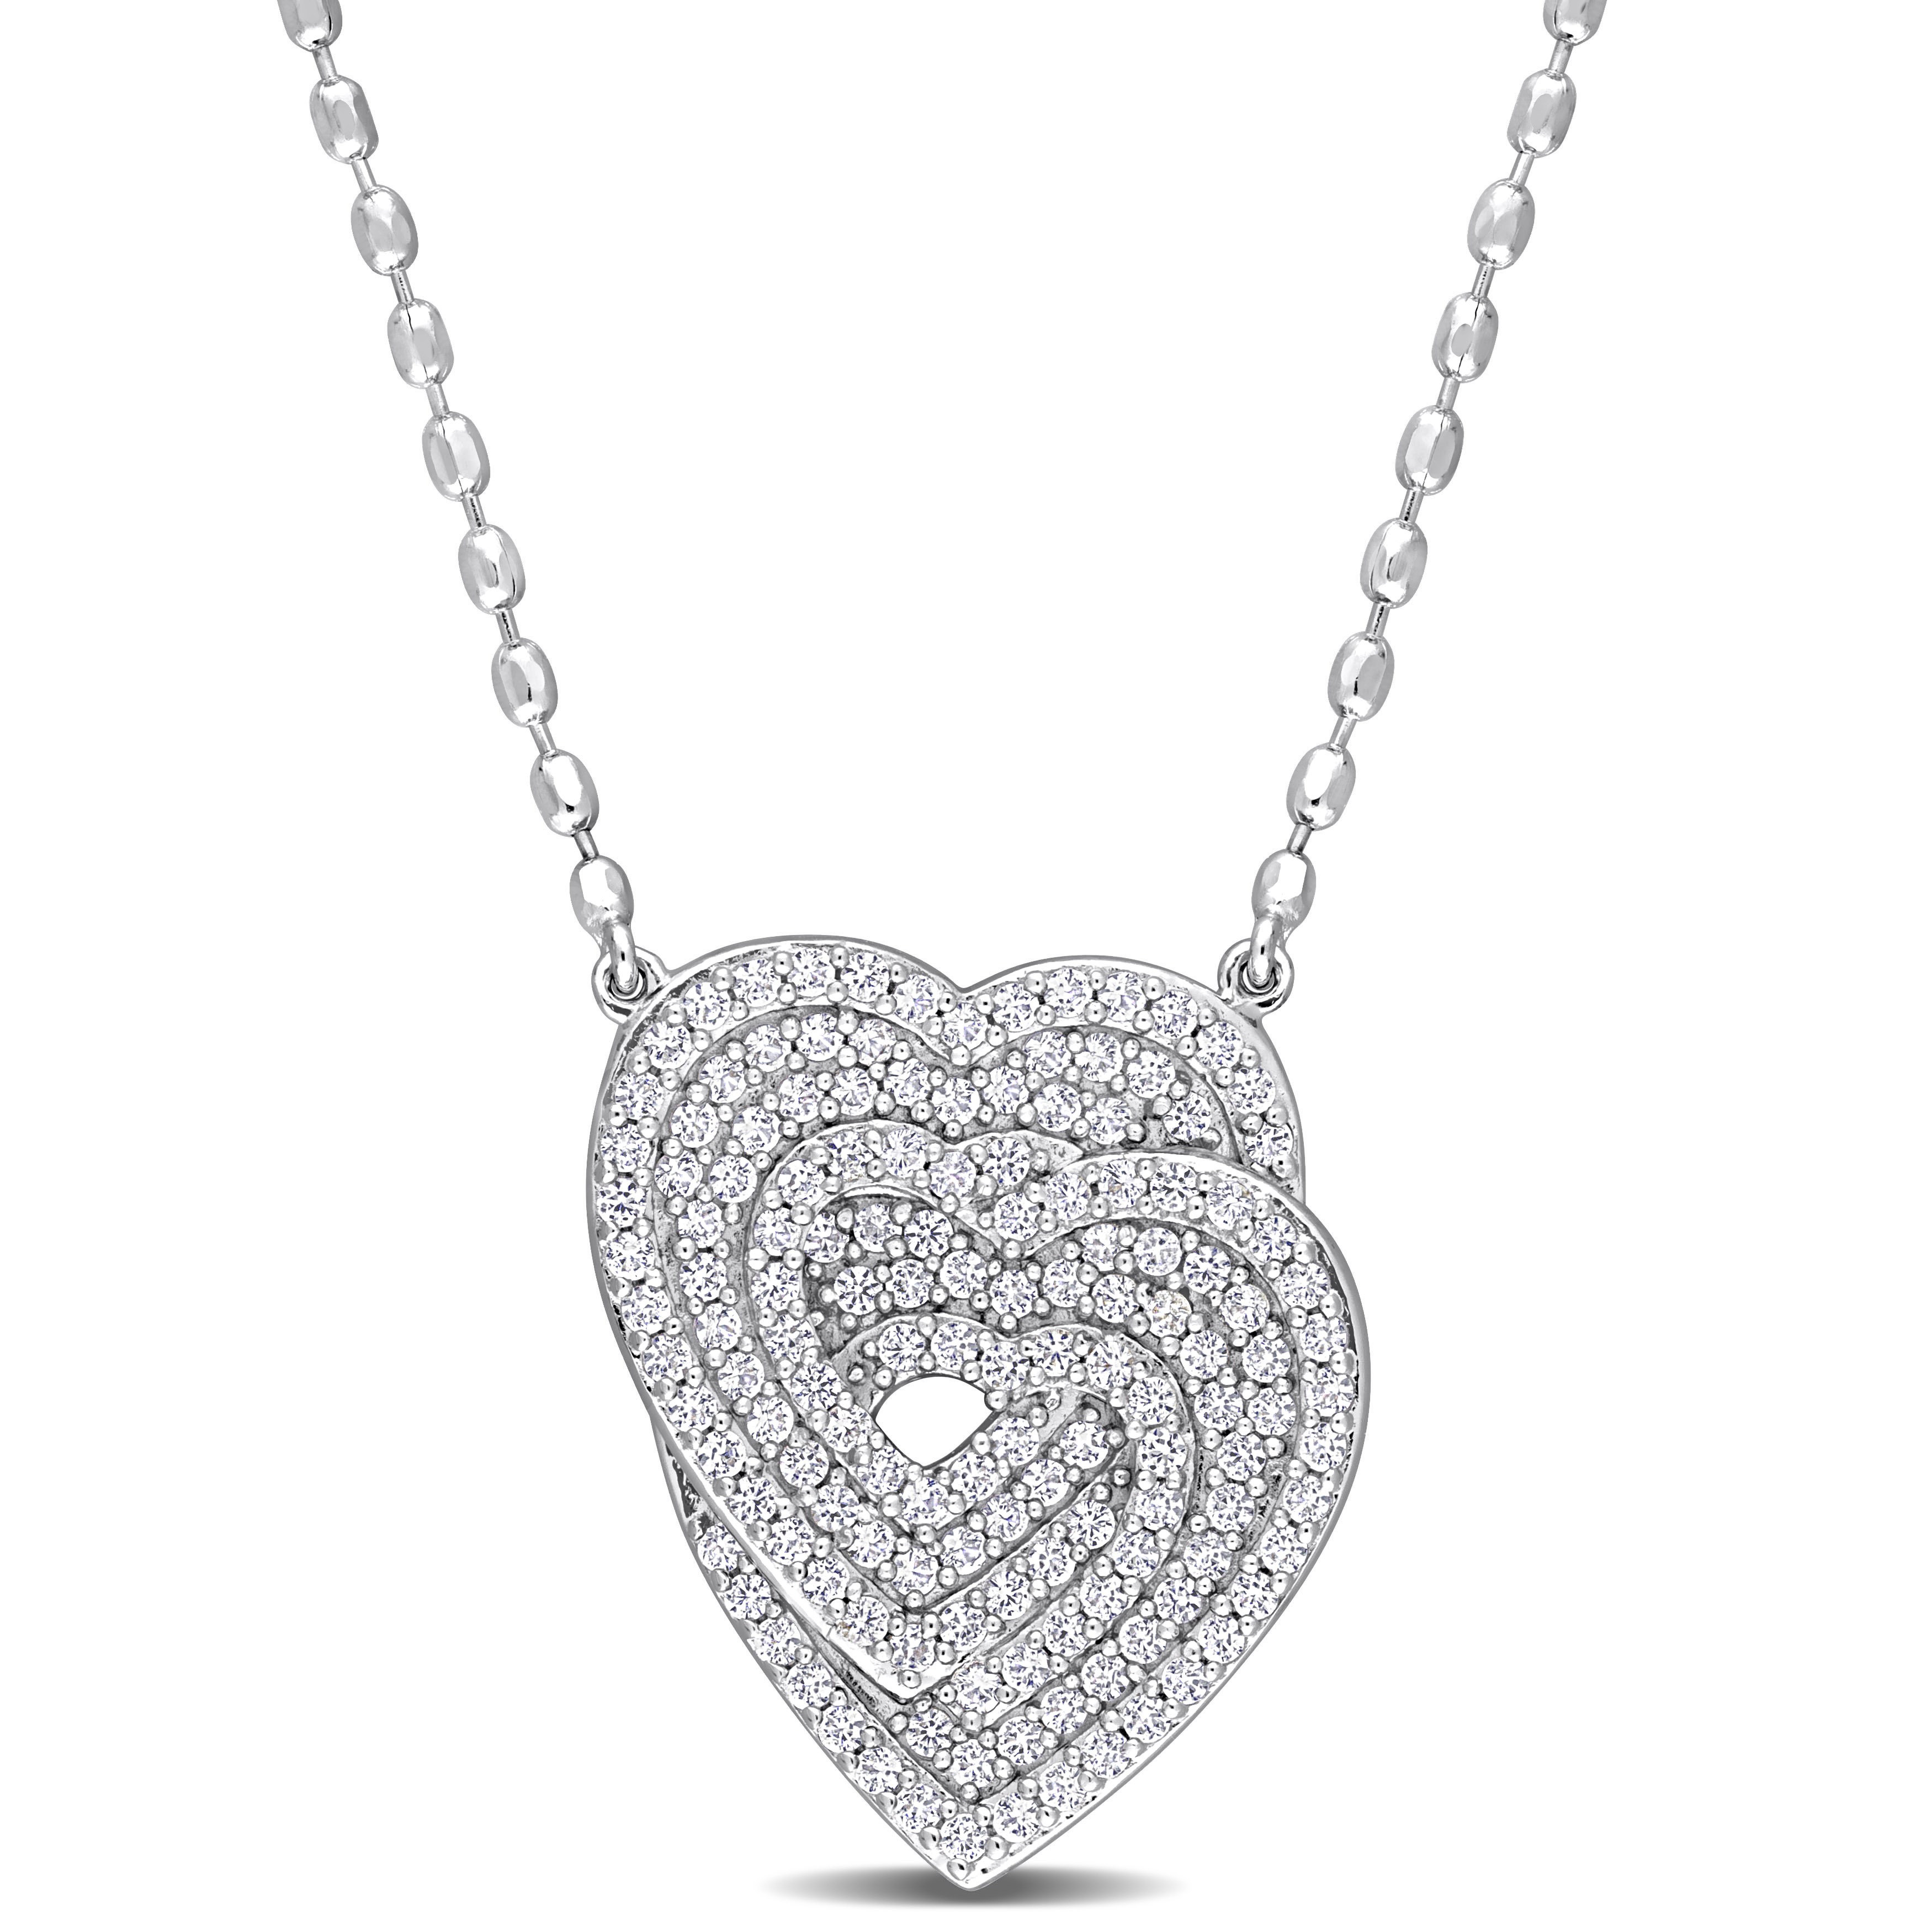 1 2/5 CT TGW Created White Sapphire Interlocking Hearts Pendant with Chain in Sterling Silver - 17 in.